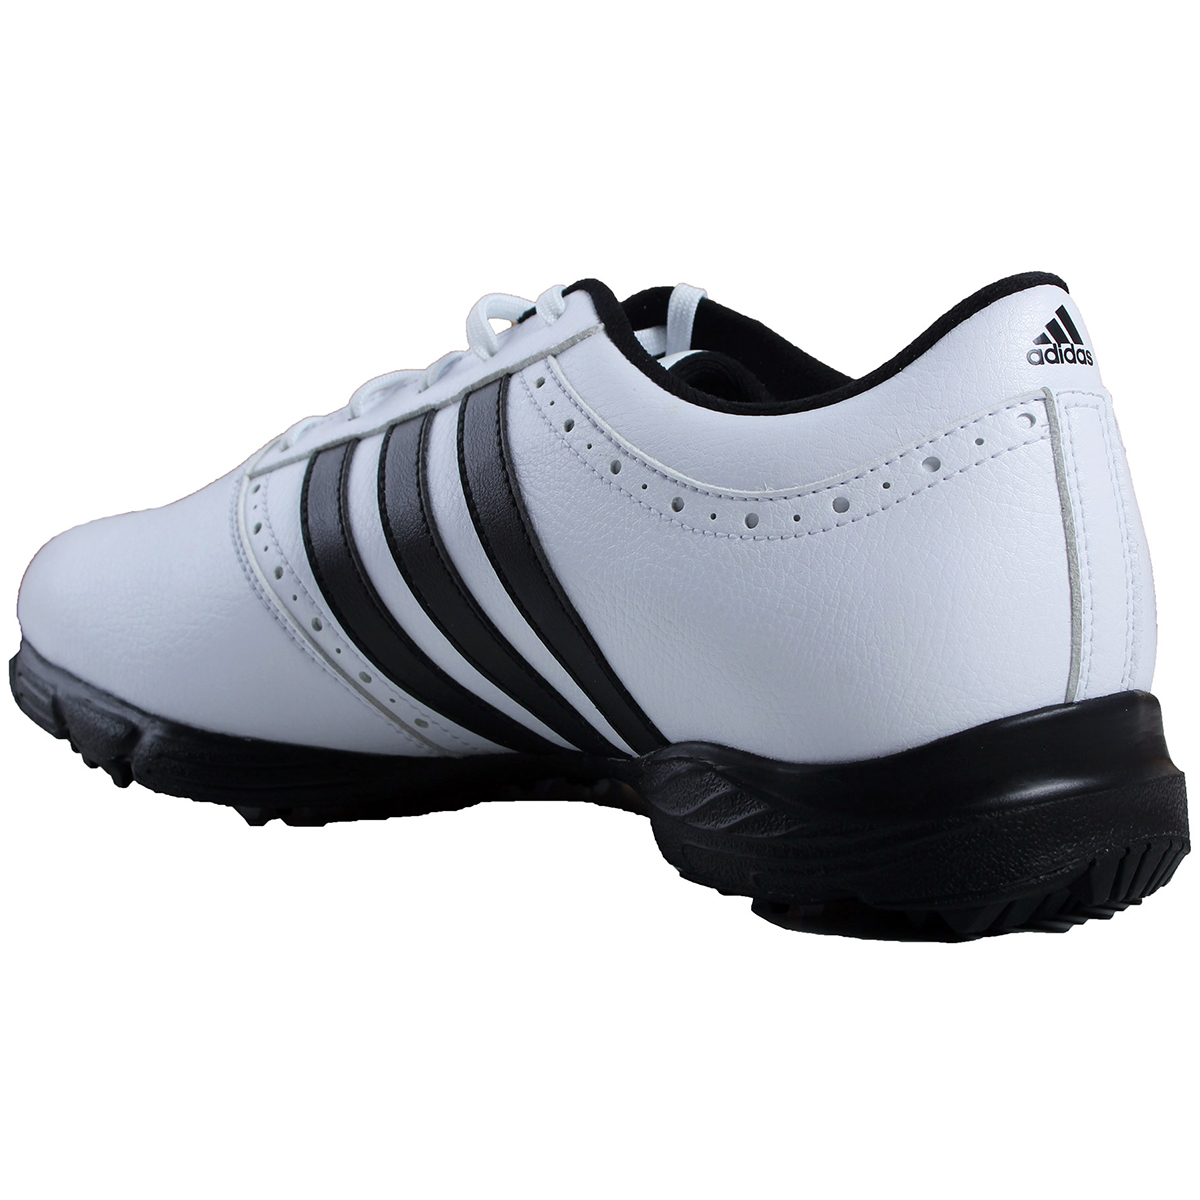 classic shoes adidas